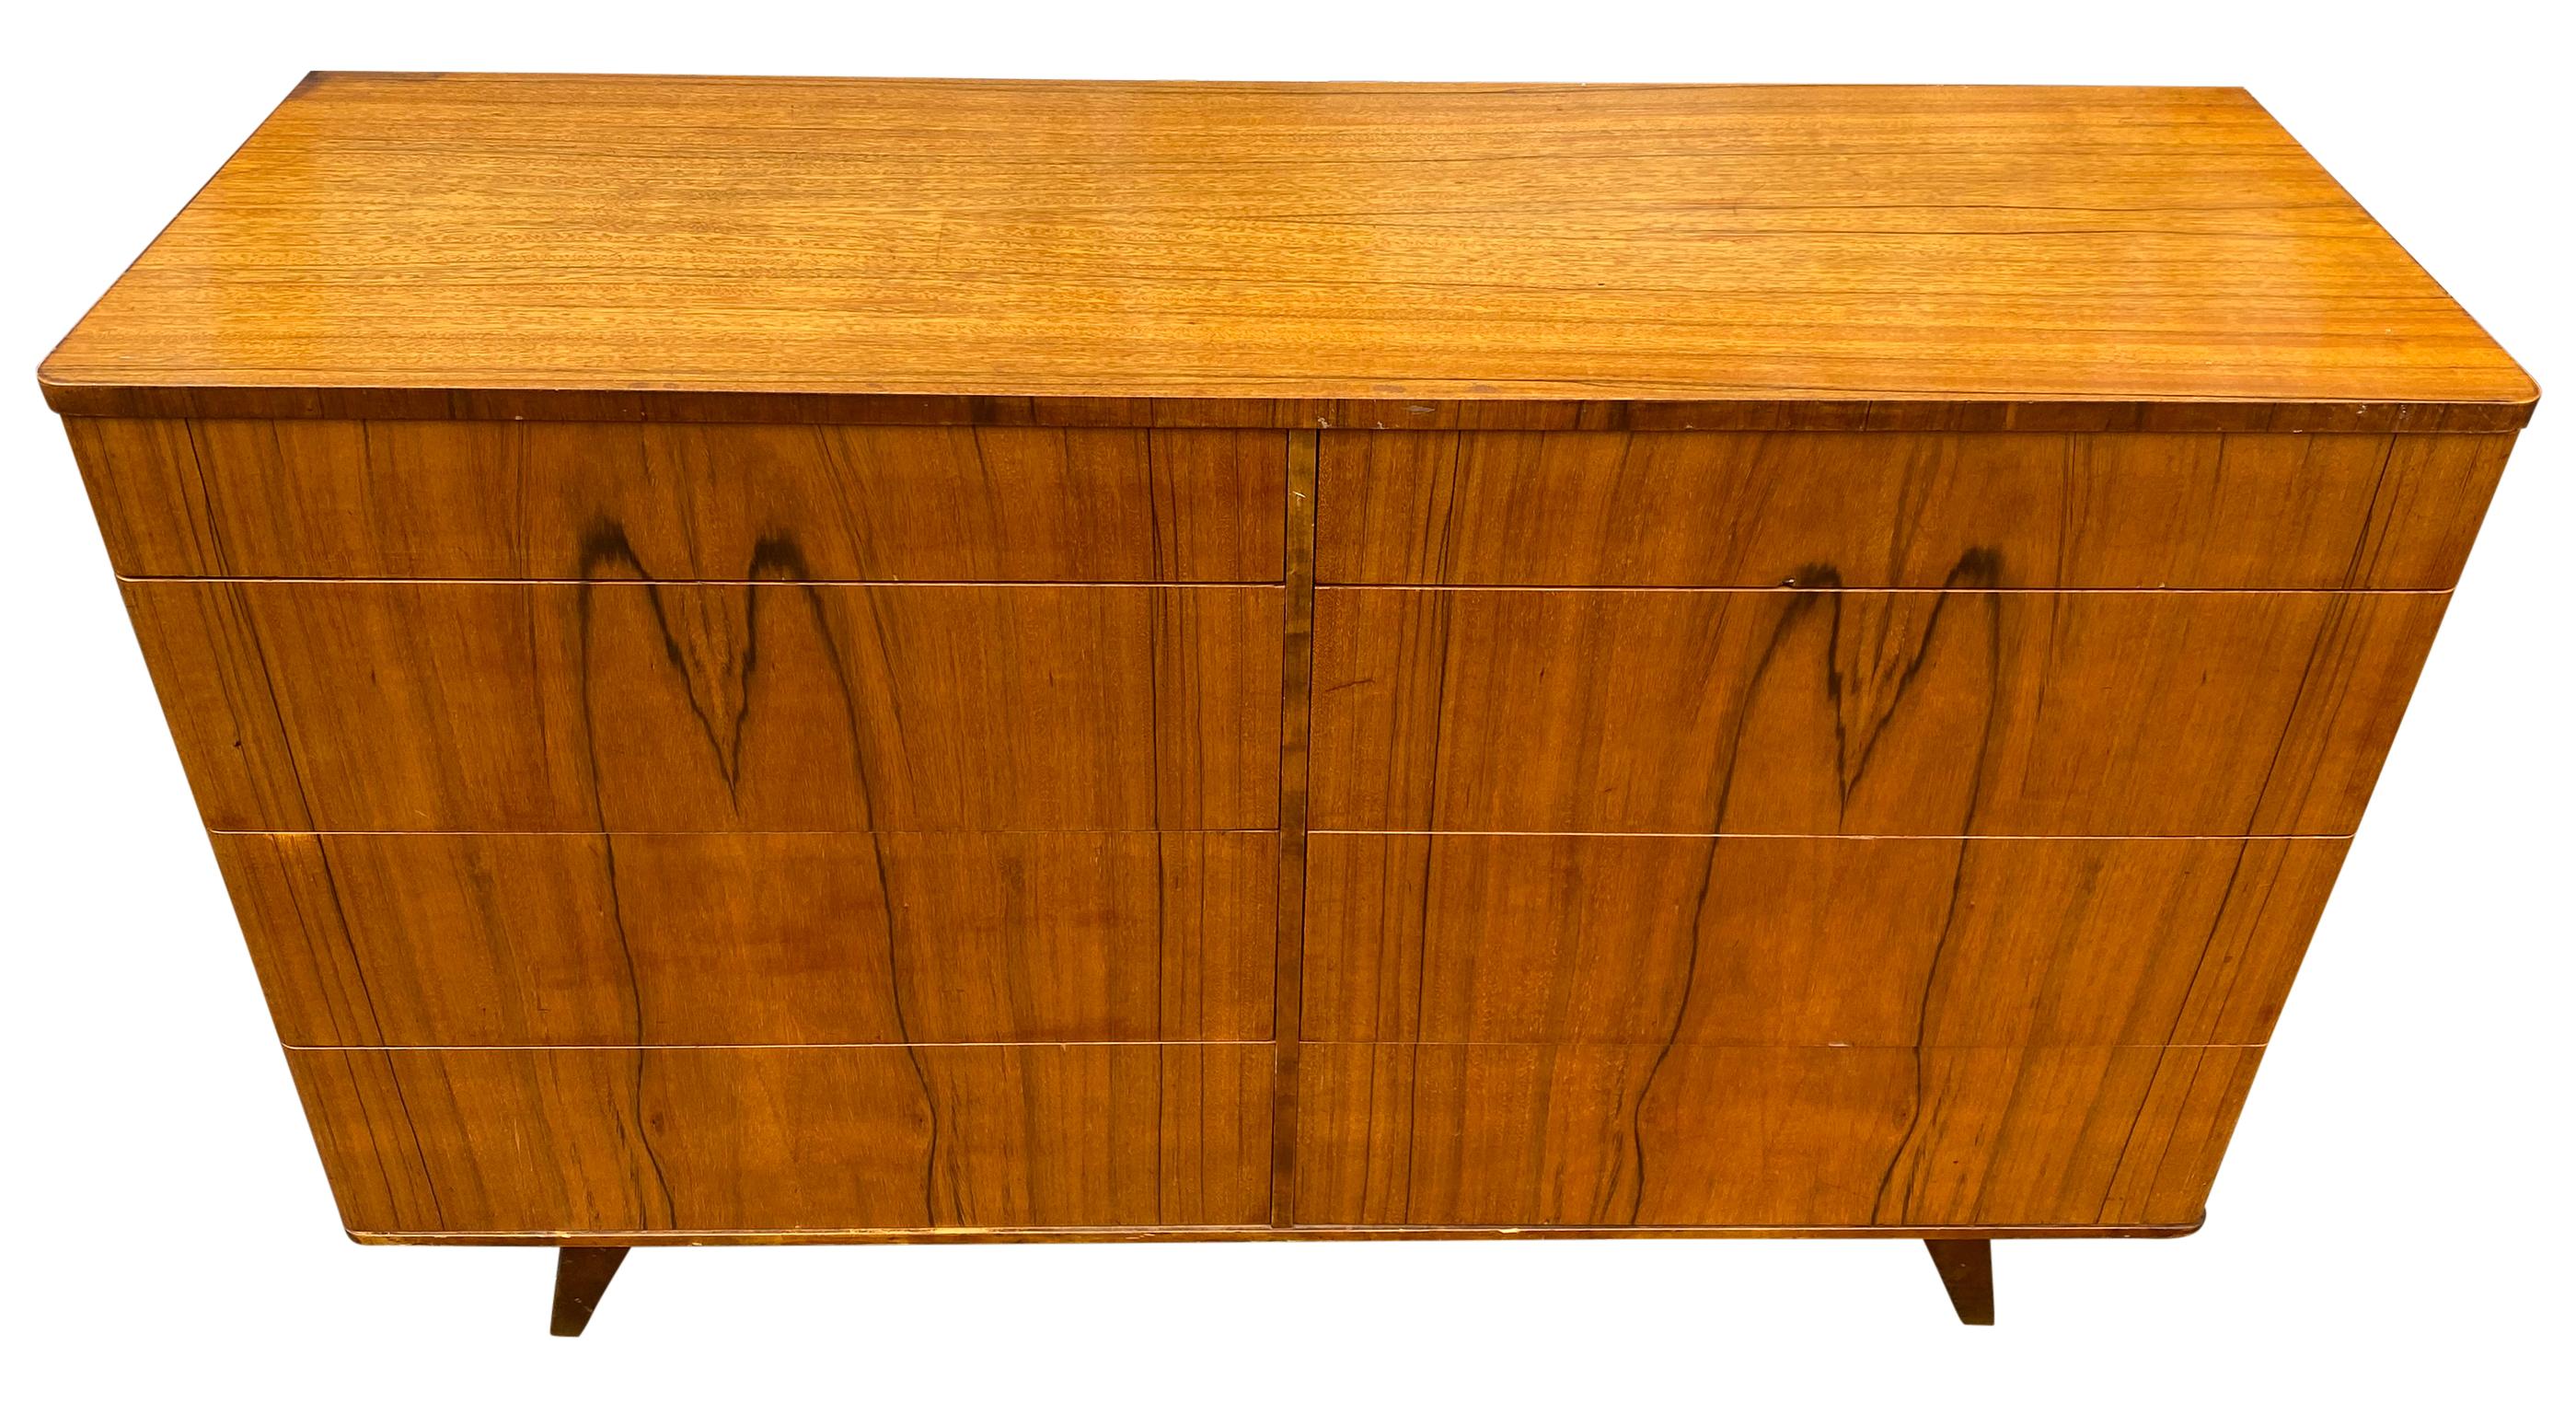 Stunning midcentury 8-drawer rosewood veneer dresser made in Sweden. Beautiful early deco style midcentury dresser. Beautiful blonde wood drawer construction all clean and slide smooth. Great Patina with a stunning rosewood veneer front drawers and